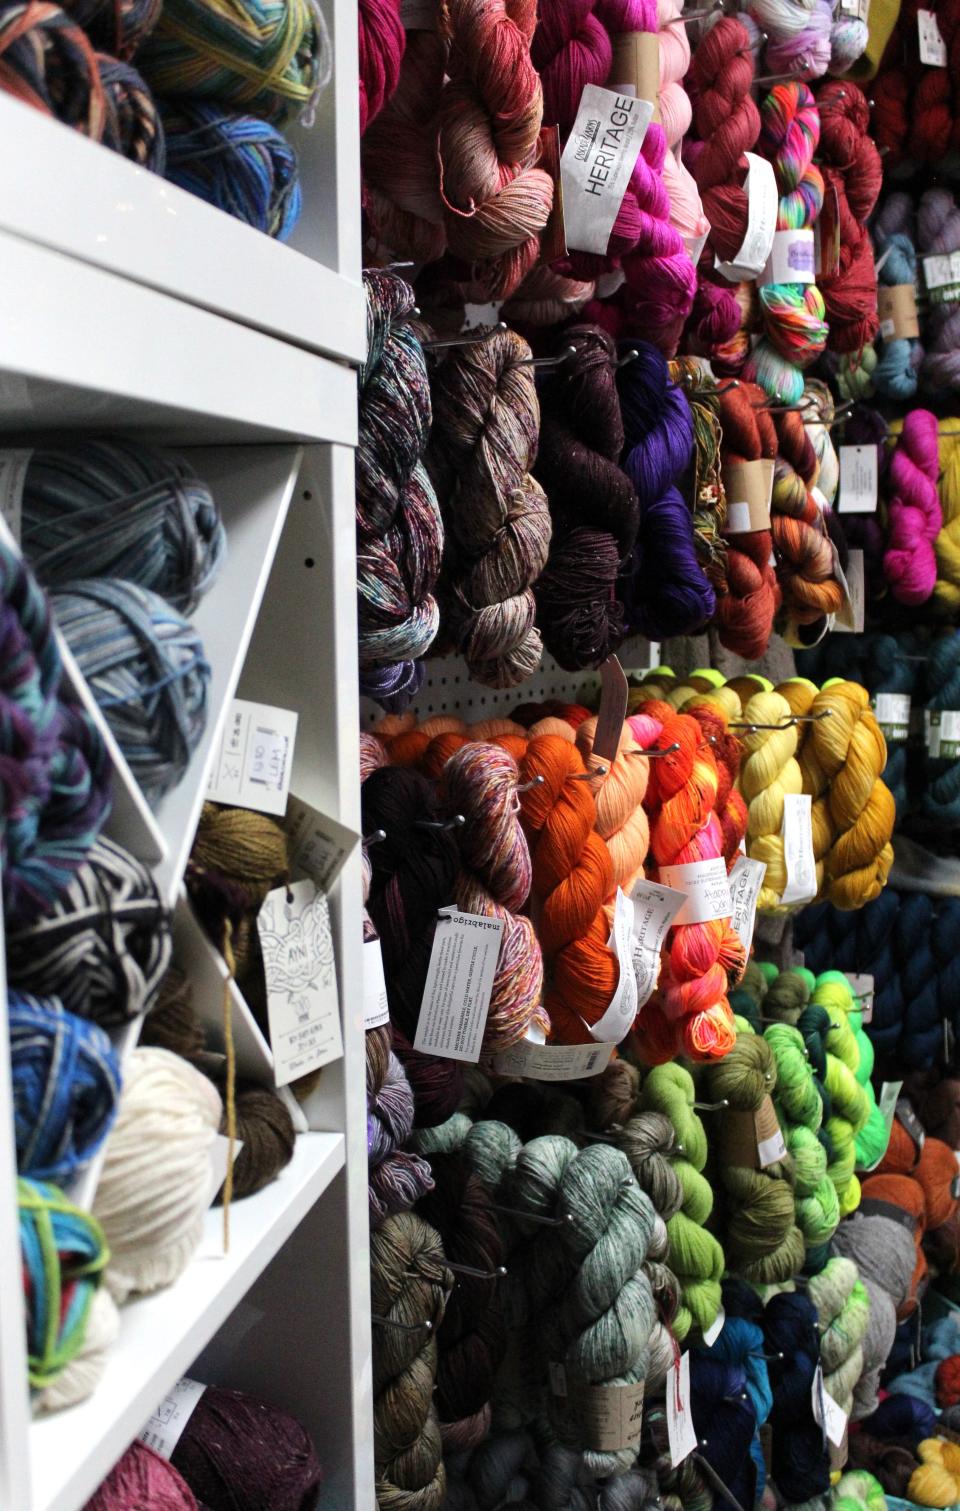 Knit-Picky & Hooked, 15555 S. Telegraph Road, features yarns, hooks, needles, kits, pattern books and notions. Classes and drop-in sessions available for a nominal fee.